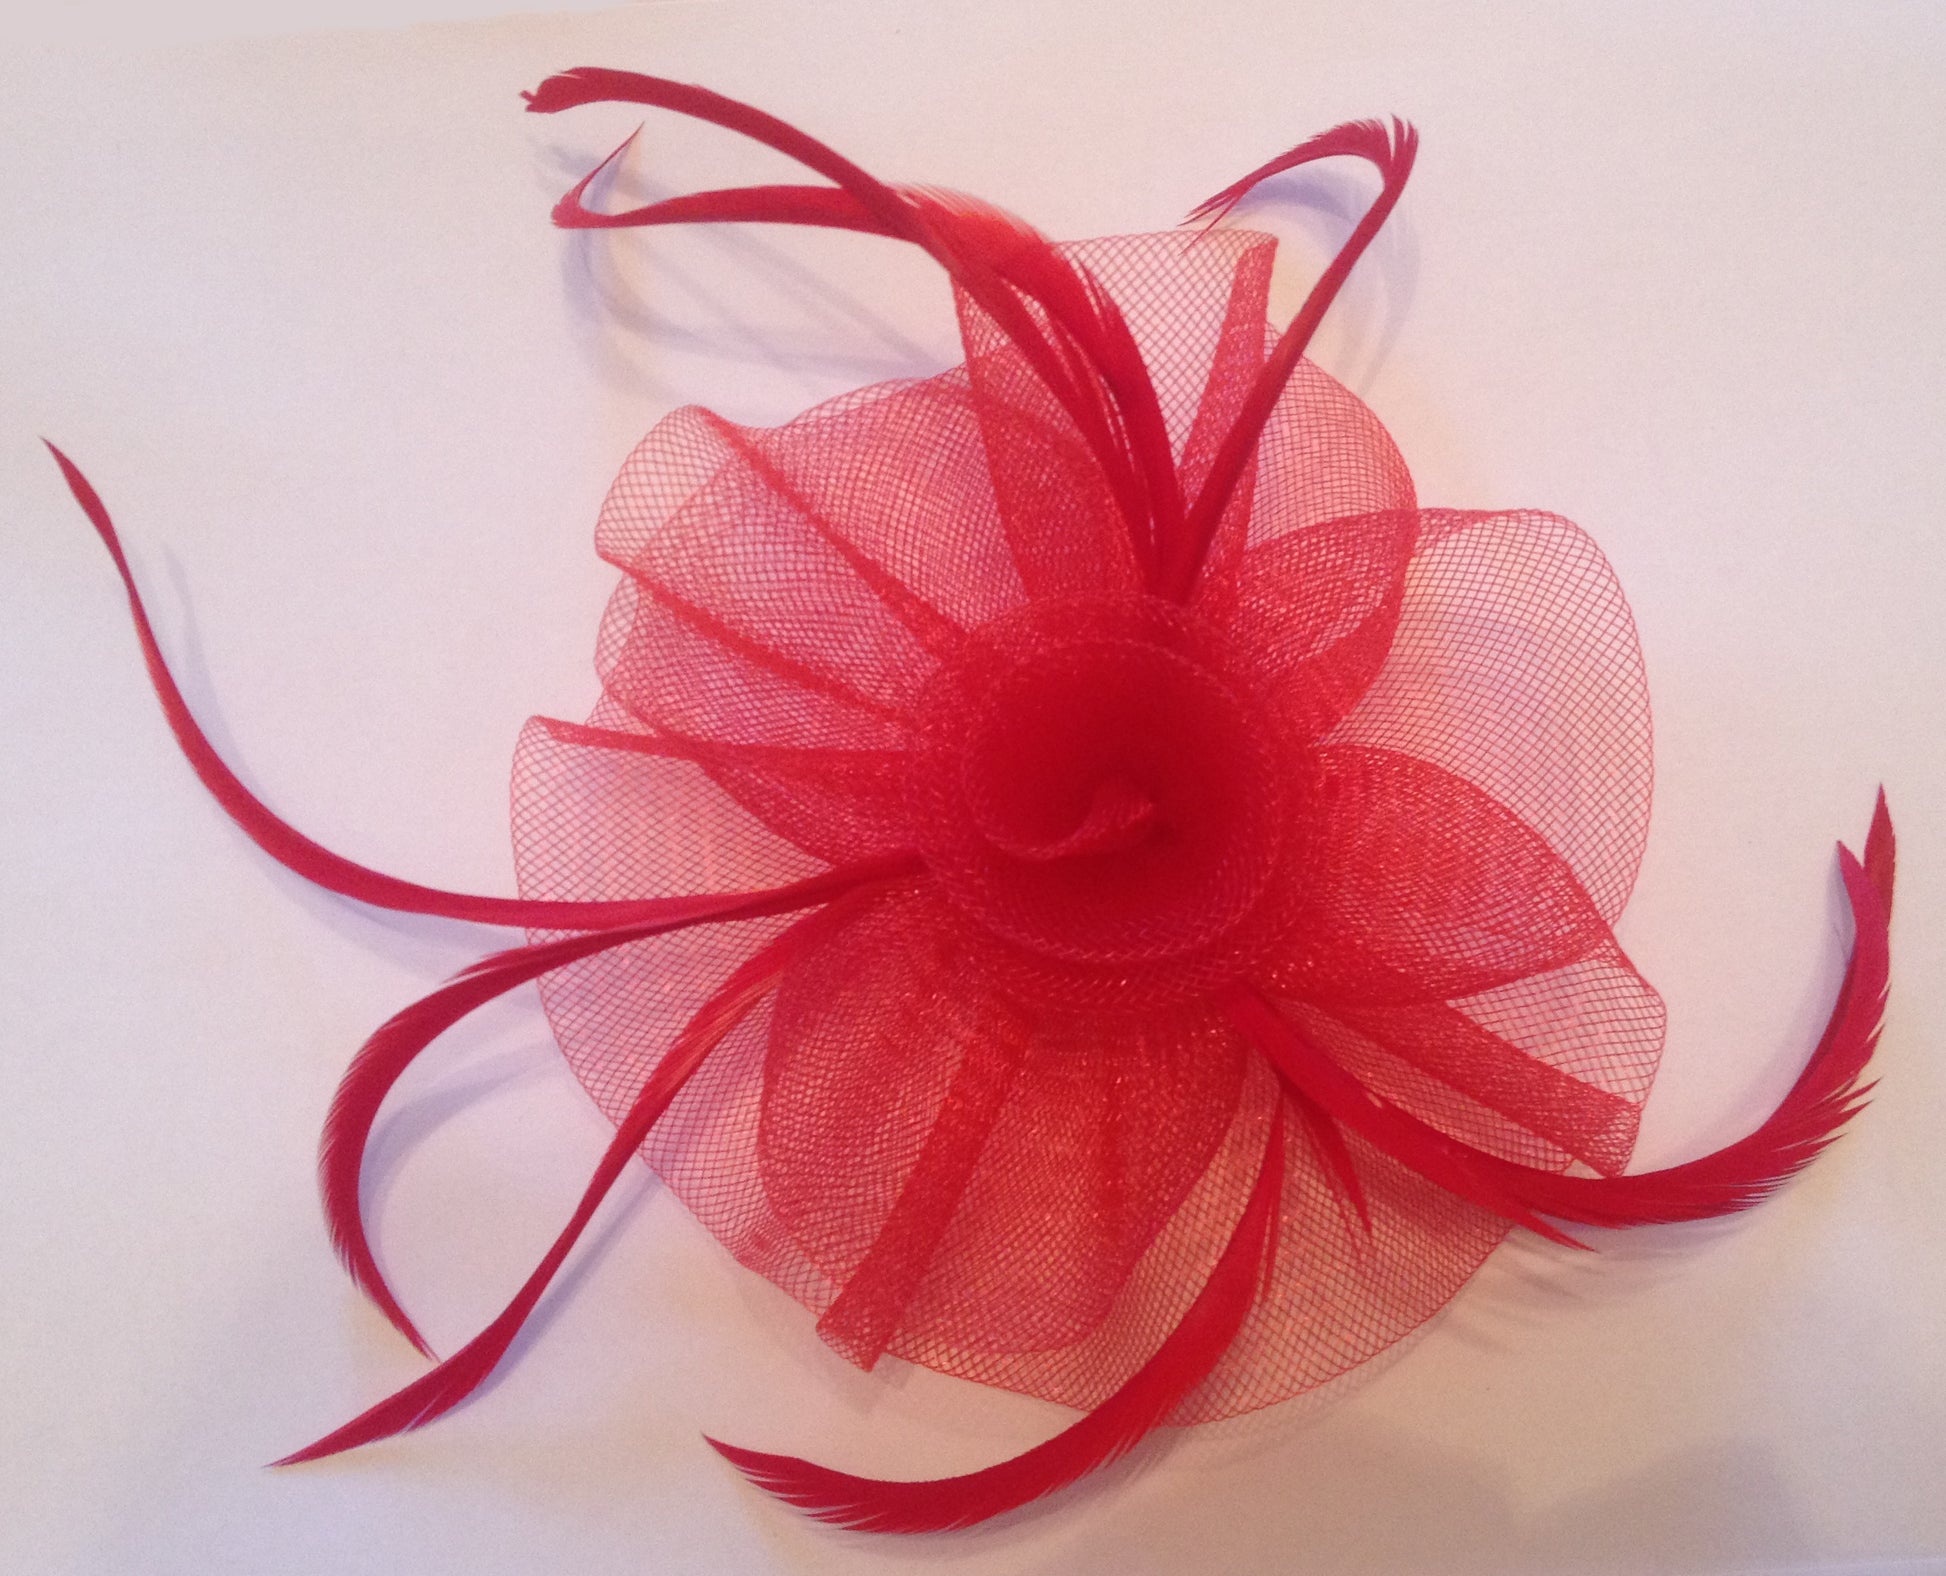 Red Fascinator, Suitable for any occasion including cocktail parties, a day at the races, corporate events, funerals and other formal occasions